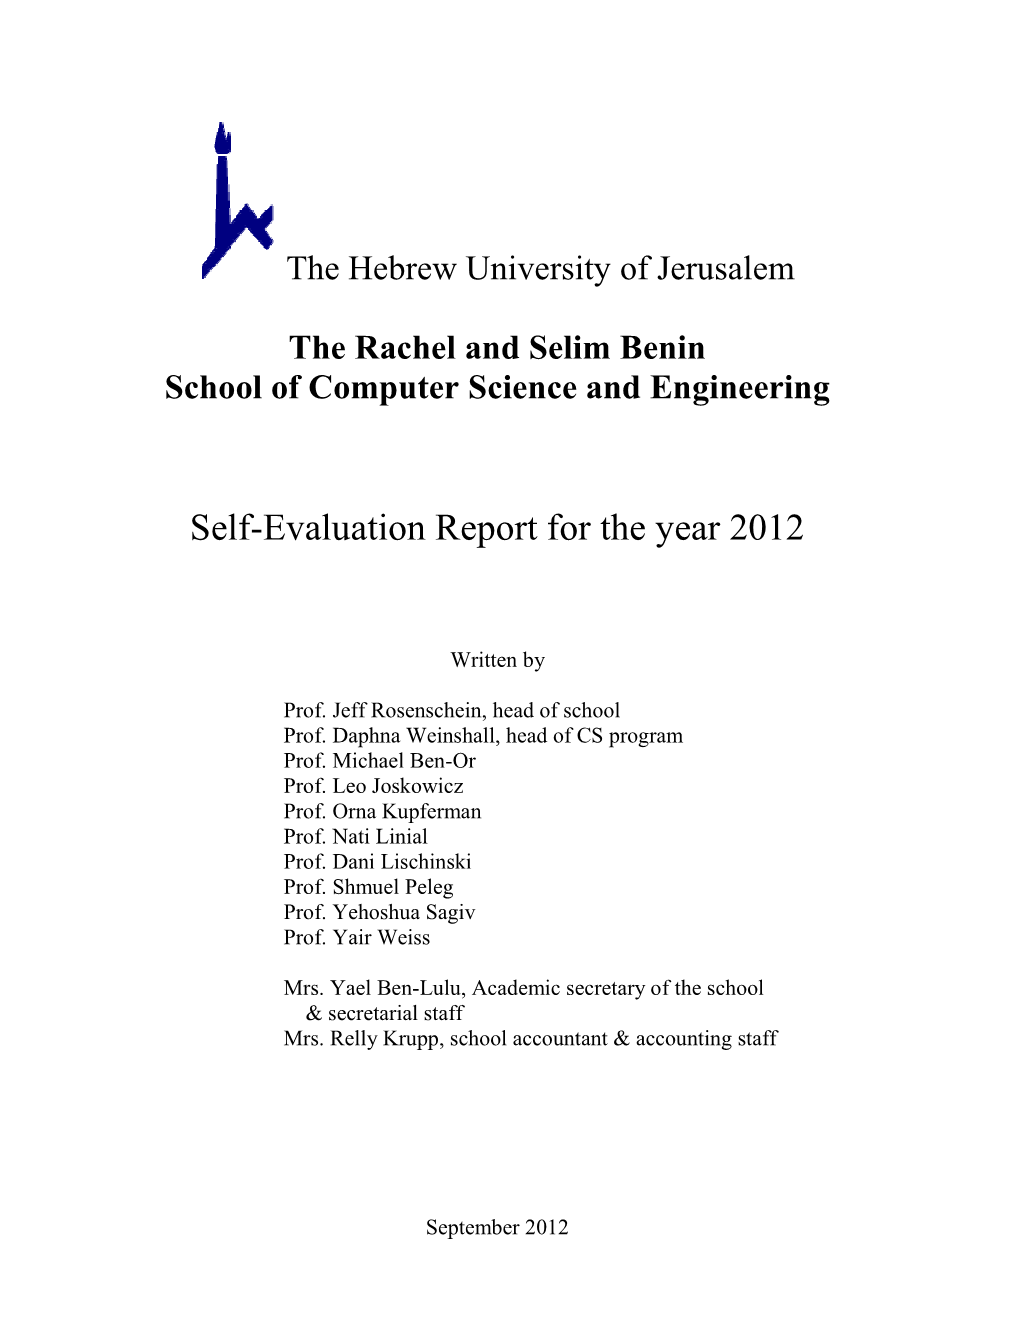 Self-Evaluation Report for the Year 2012